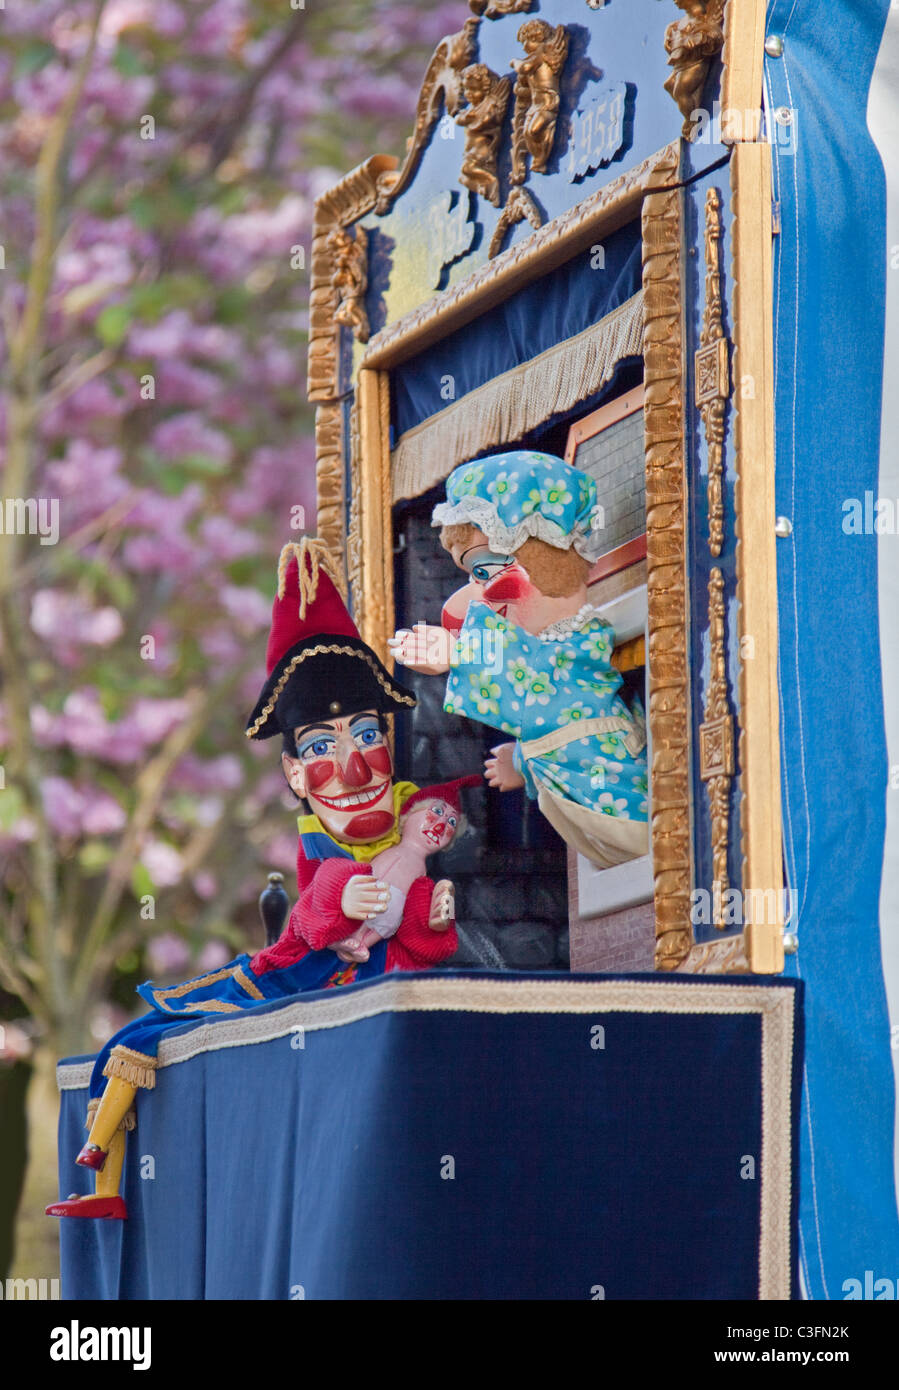 Punch and Judy Show, Hampshire, England Stockfoto